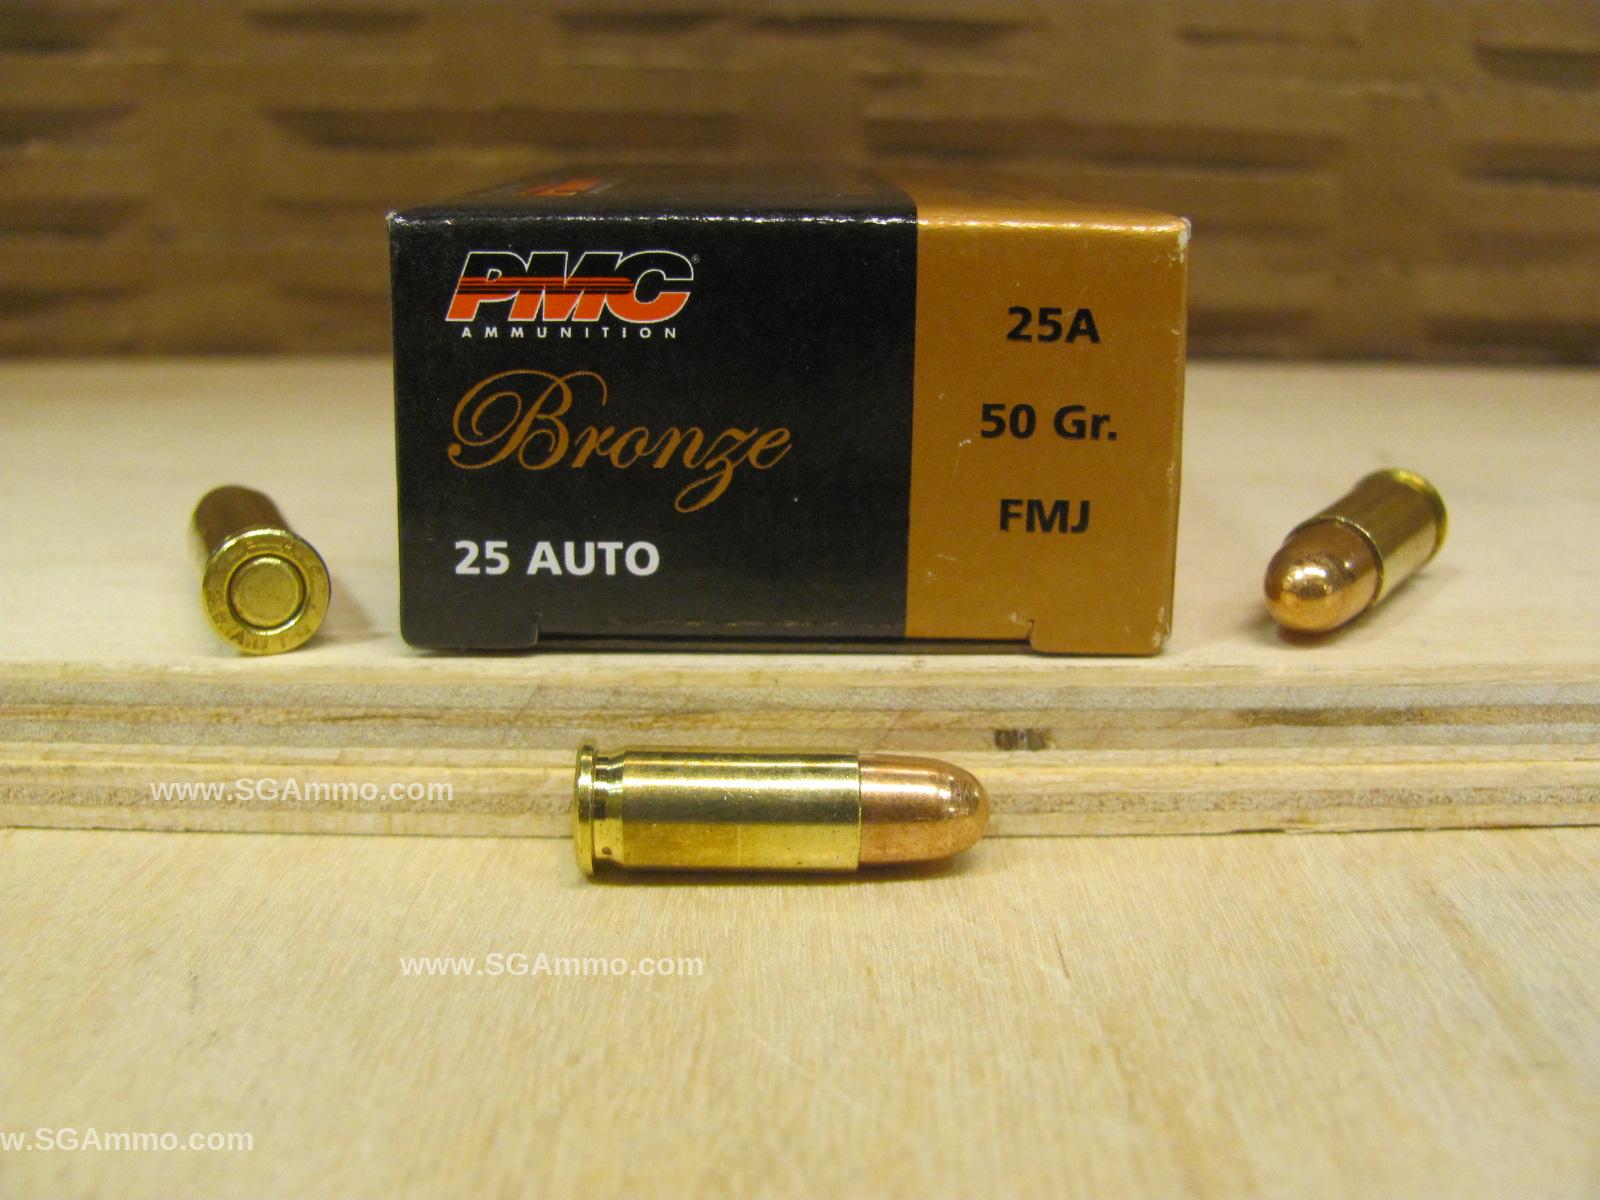 500 Round Plastic Can - 25 Auto 50 Grain FMJ Ammo by PMC - 25A - Packed in Small Plastic Canister